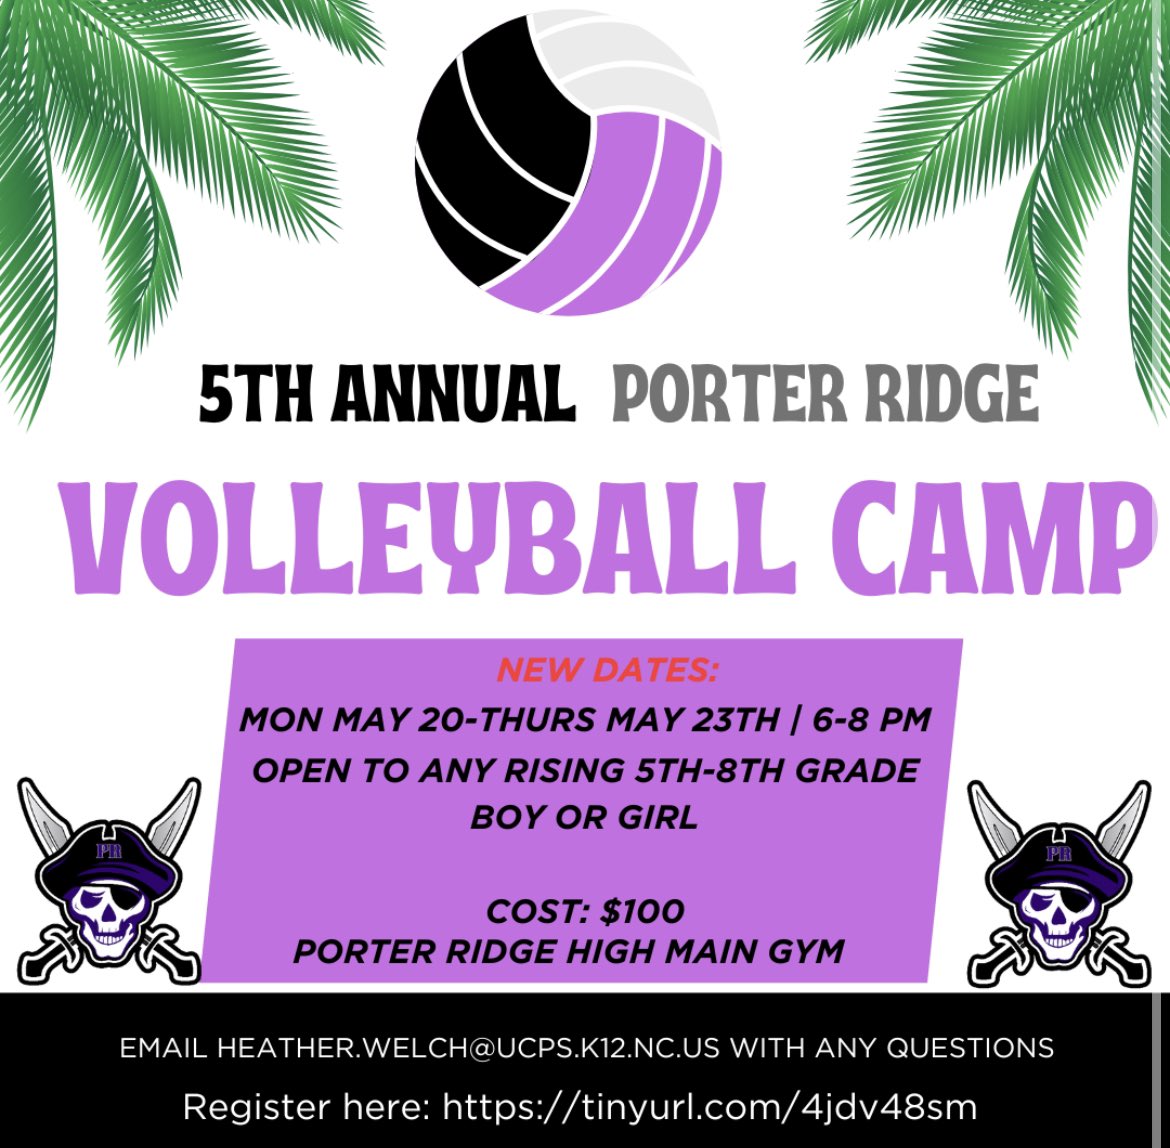 NEW DATES ‼️Attention middle school girls and boys ‼️It’s time to sign up for volleyball camp!!! Who: Rising 5-8th graders (any school, you don’t have to go to PR) When: May 20, 21, 22, 23 from 6-8pm Cost: $100 & at Porter Ridge HS main gym Link: tinyurl.com/4jdv48sm